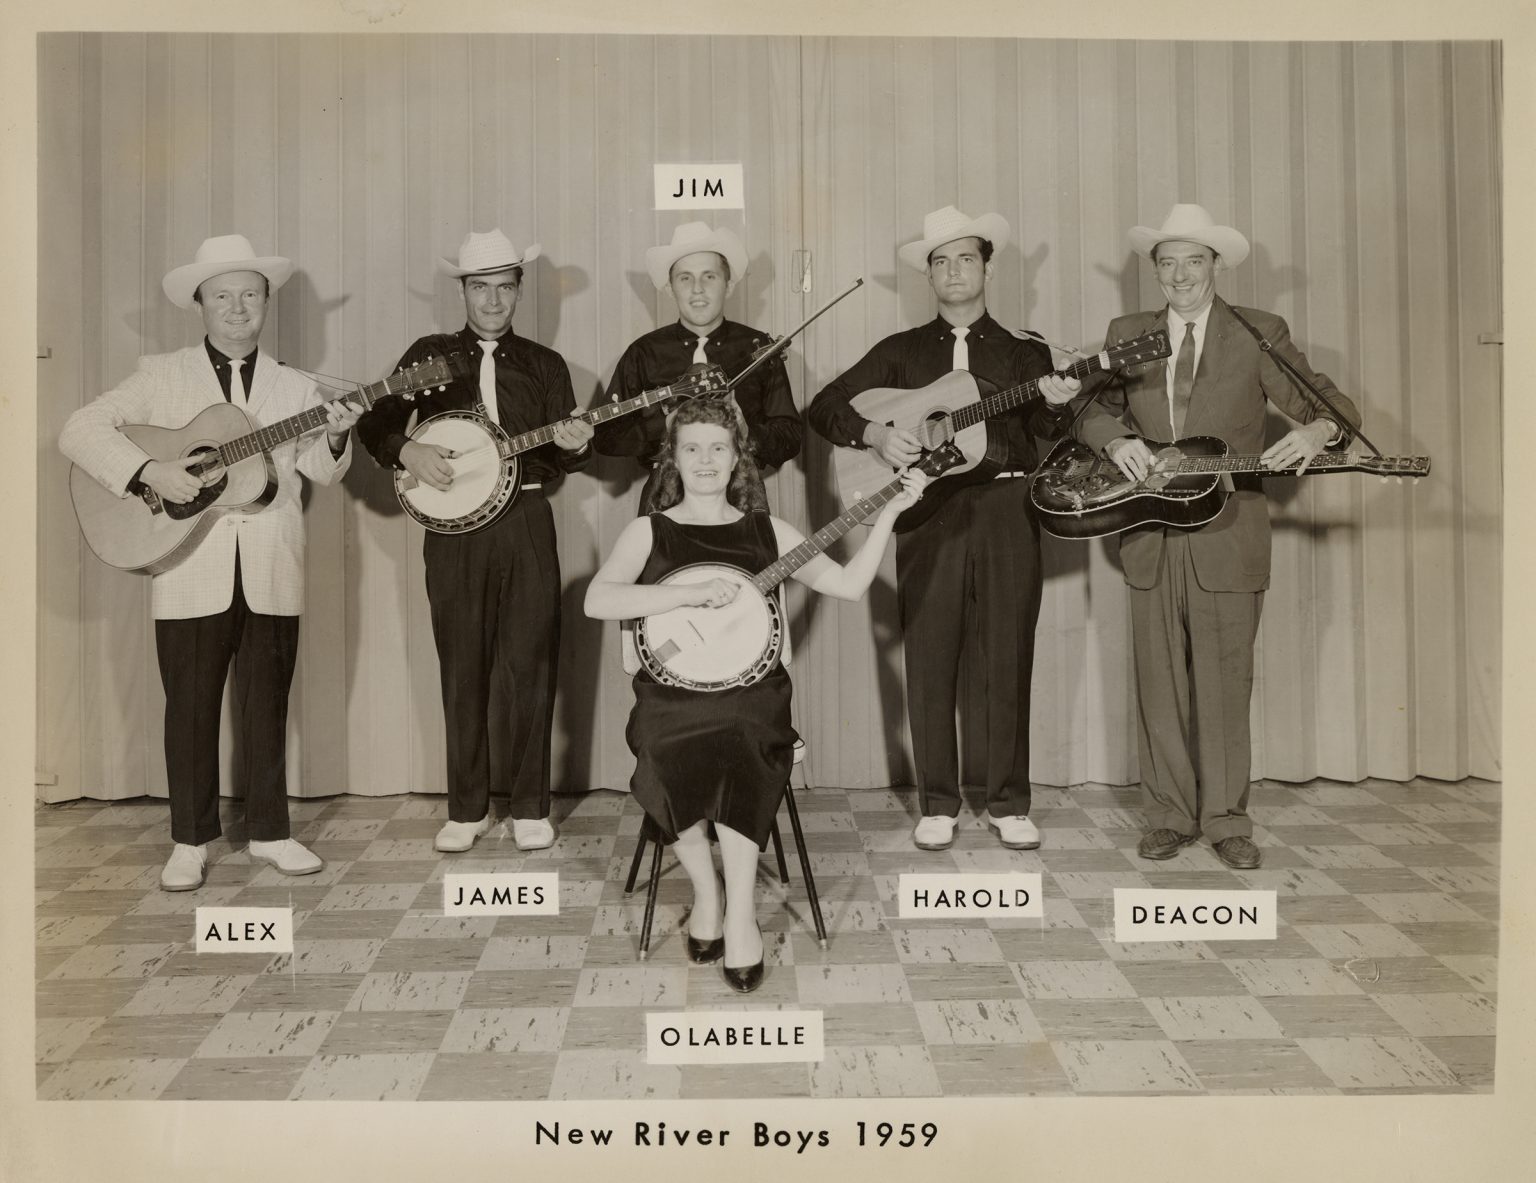 In a sepia toned photograph, five white men with guitars, a banjo and a violin stand behind a seated woman holding a banjo. Each man is identified by their names — Alex, James, Jim, Harold, Deacon — and the woman as Olabelle. A caption at the bottom says New River Boys 1959.